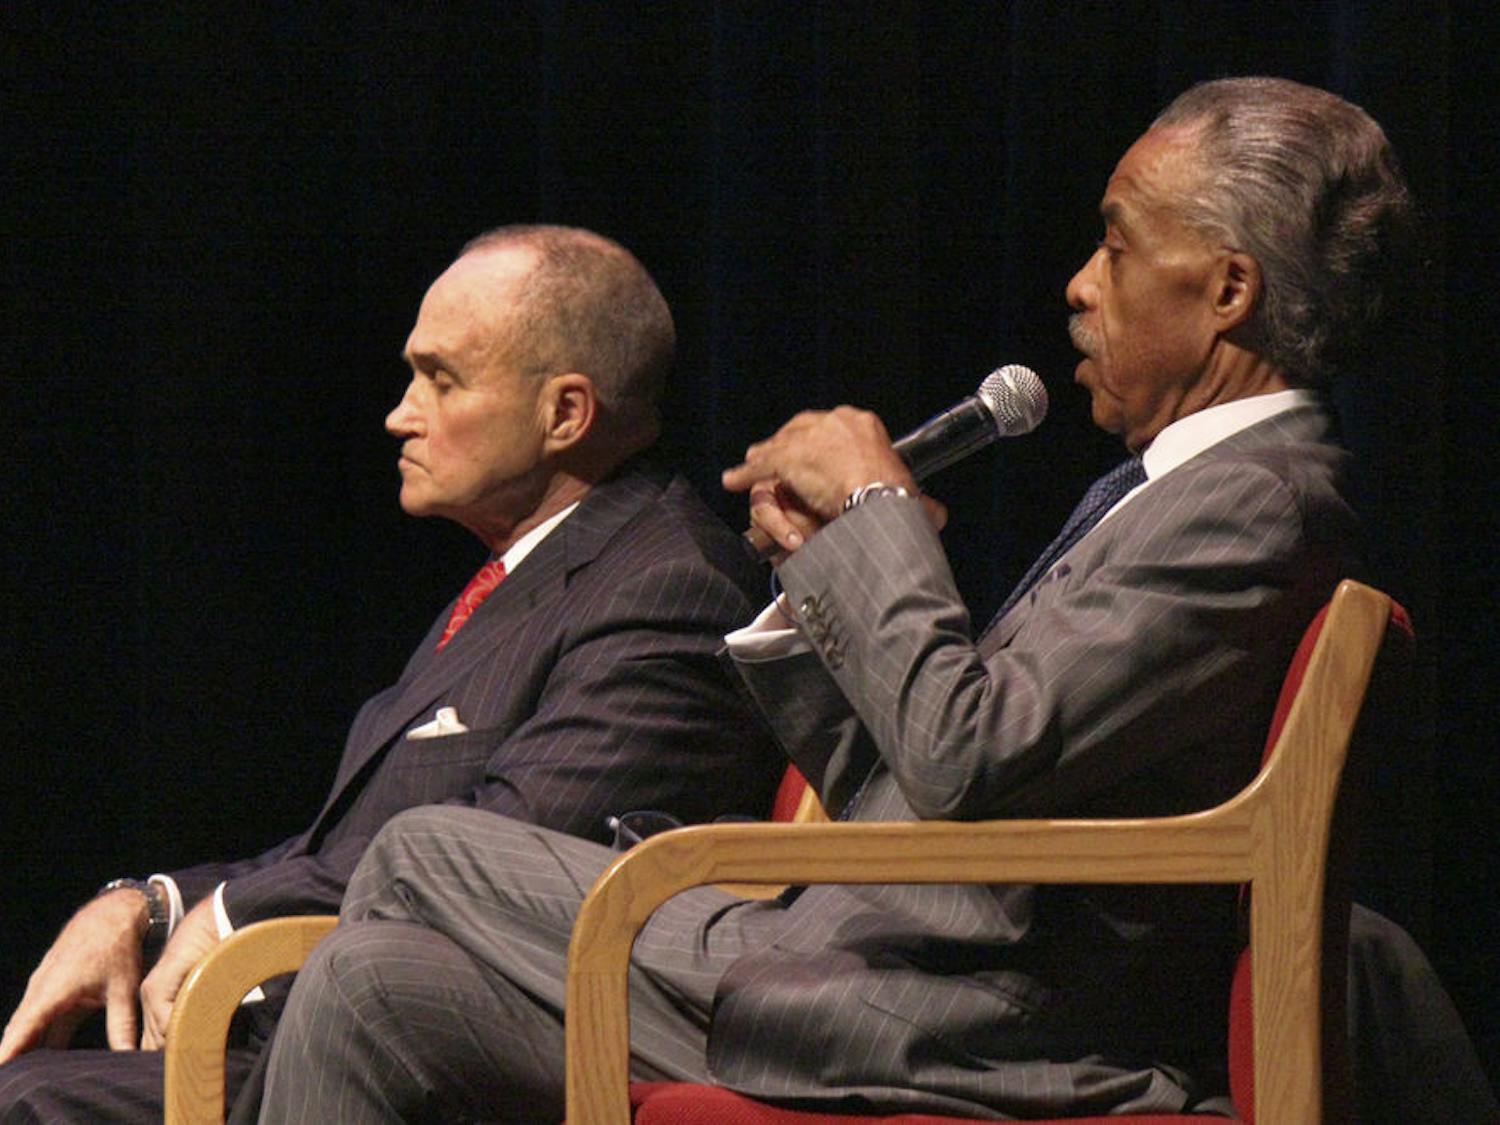 Rev. Al Sharpton, right, and former New York City police commissioner Raymond Kelly speak at ACCENT Speakers Bureau’s “A Conversation on Policing, Gun Violence, and Civil Rights” event Nov. 17, 2015, in the Phillips Center.